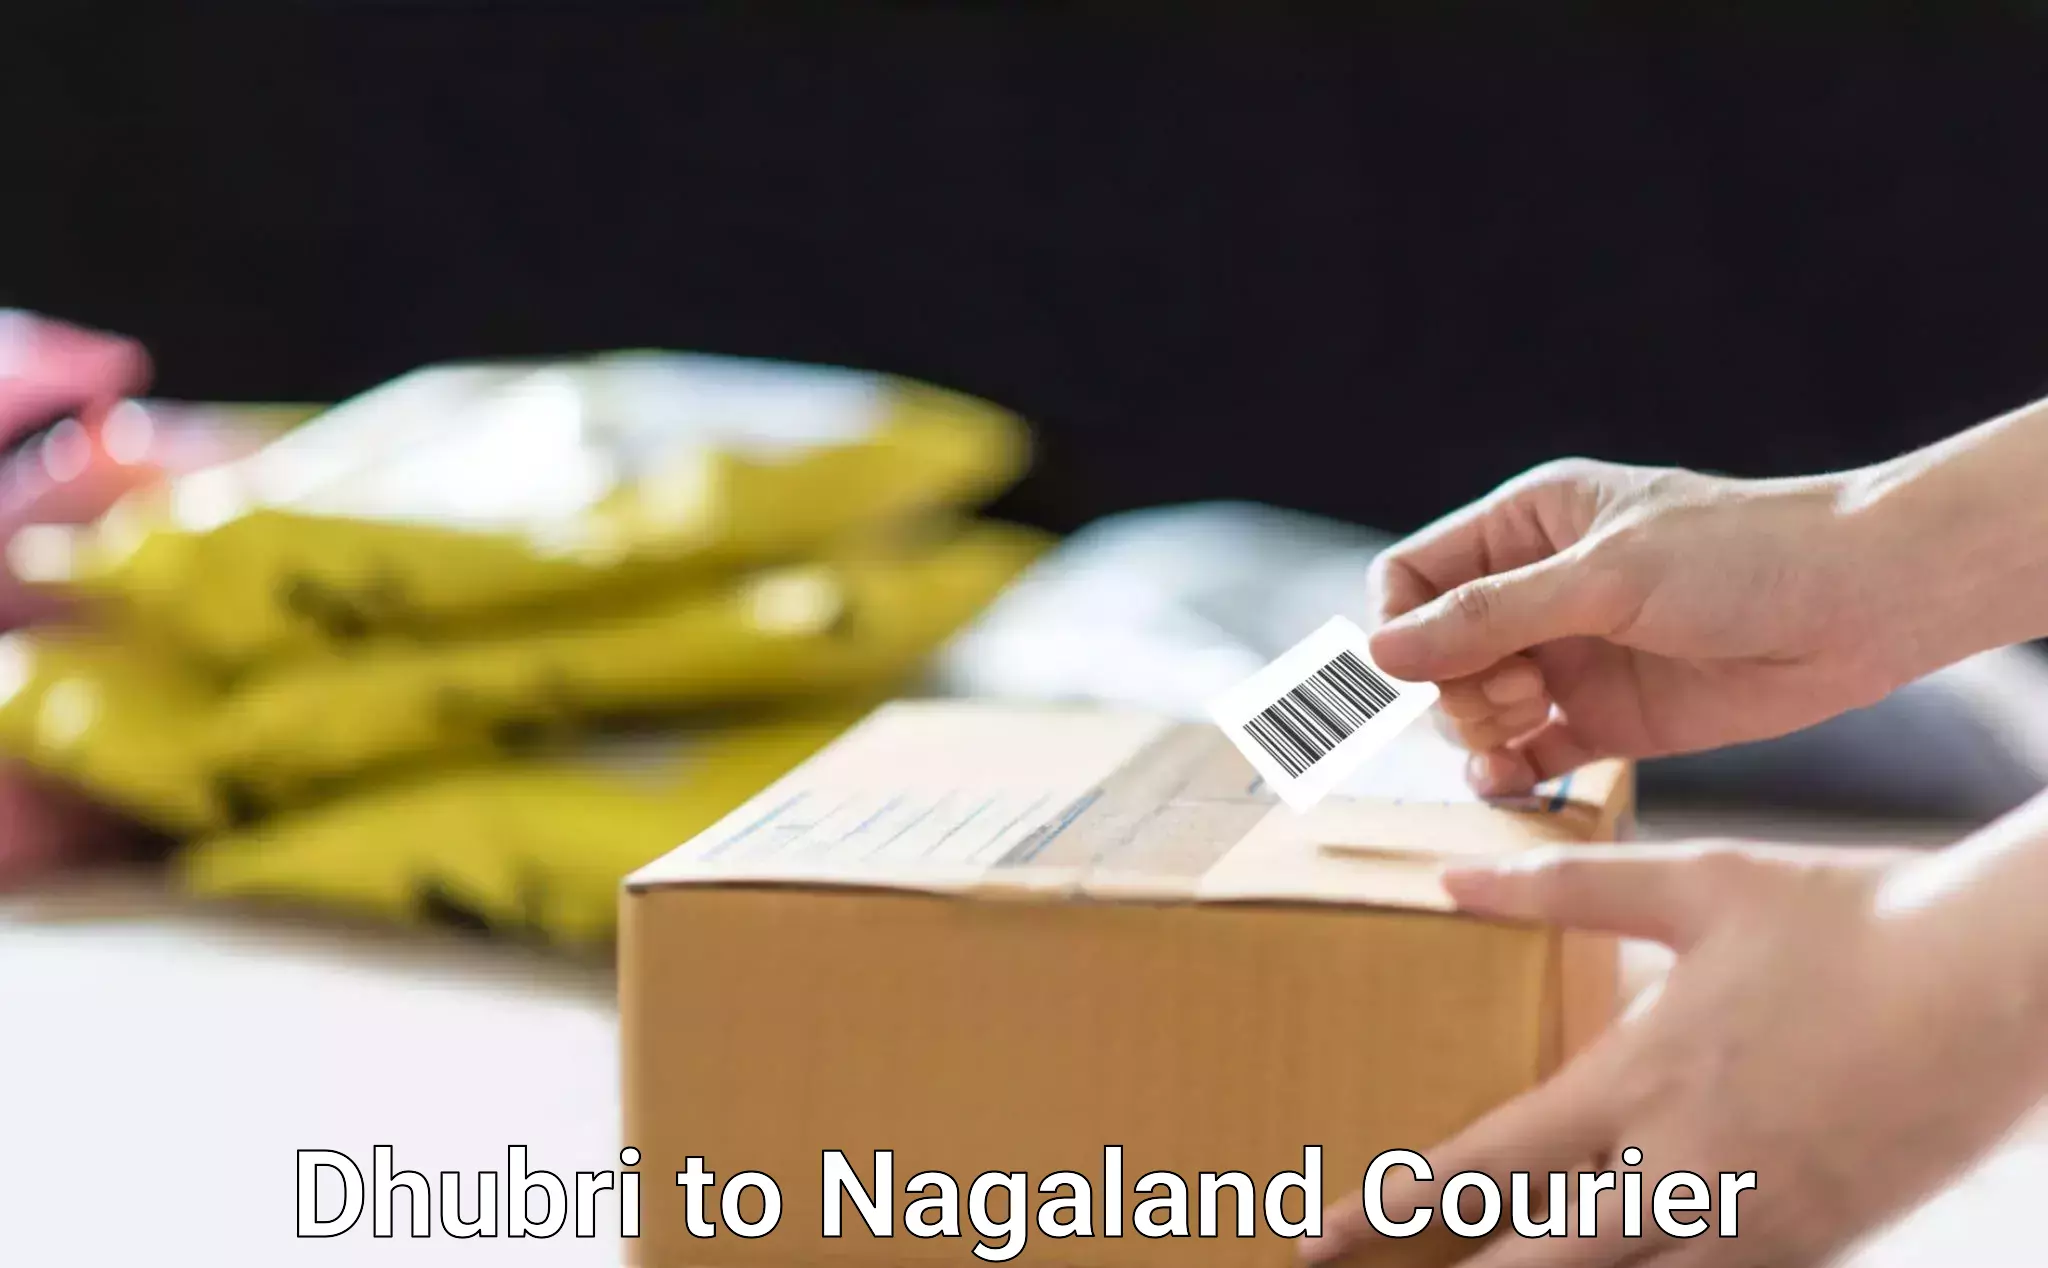 Nationwide courier service Dhubri to Nagaland